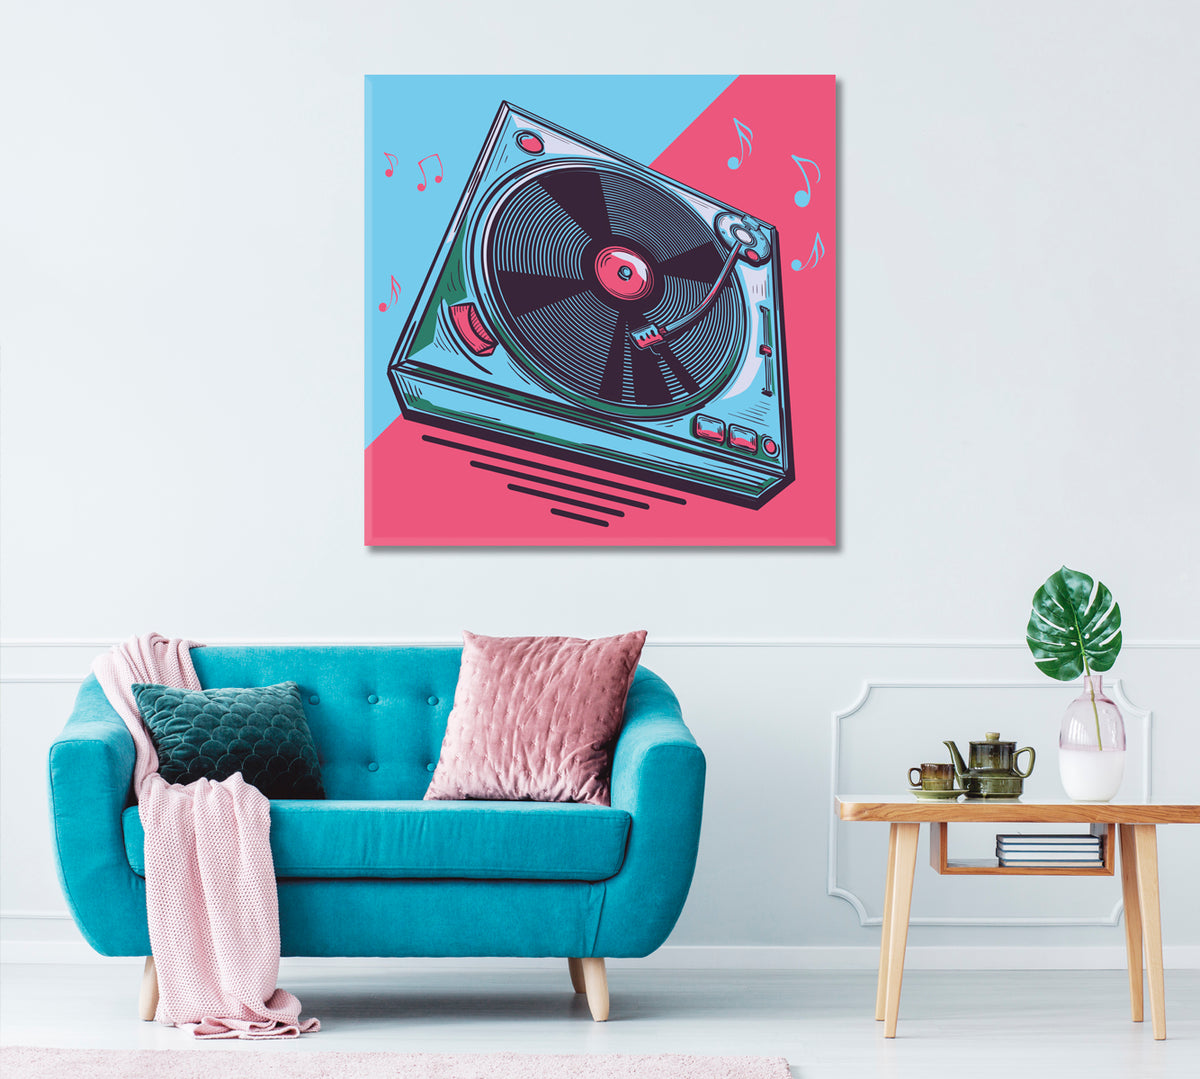 Musical Turntable Canvas Print ArtLexy 1 Panel 12"x12" inches 